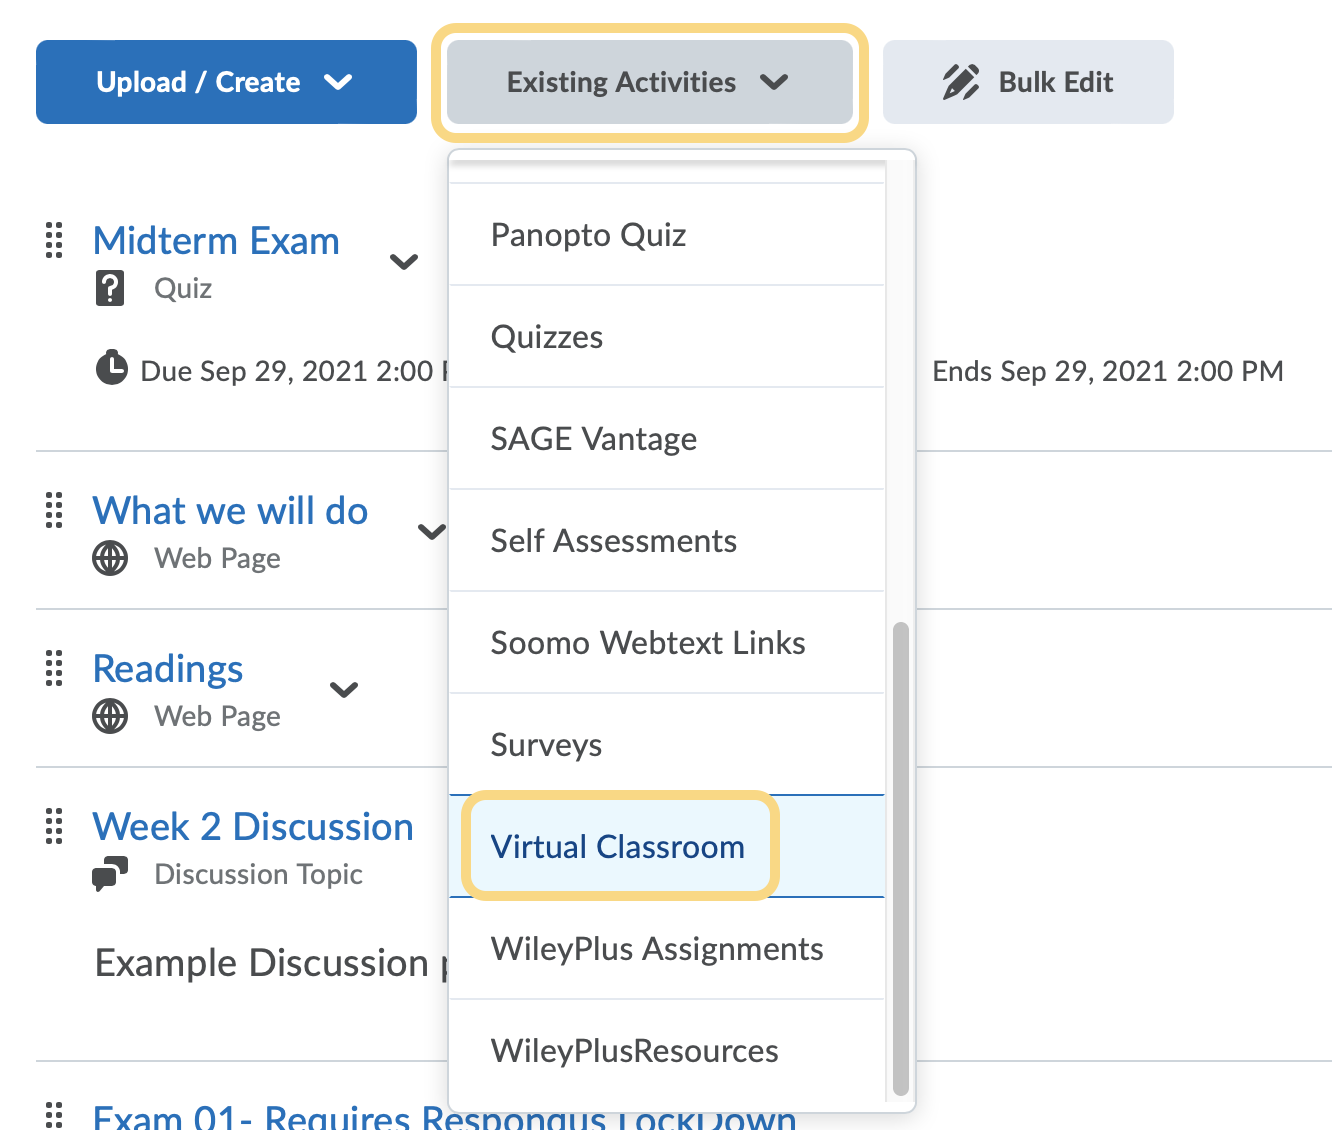 Virtual Classroom from Existing Activities menu